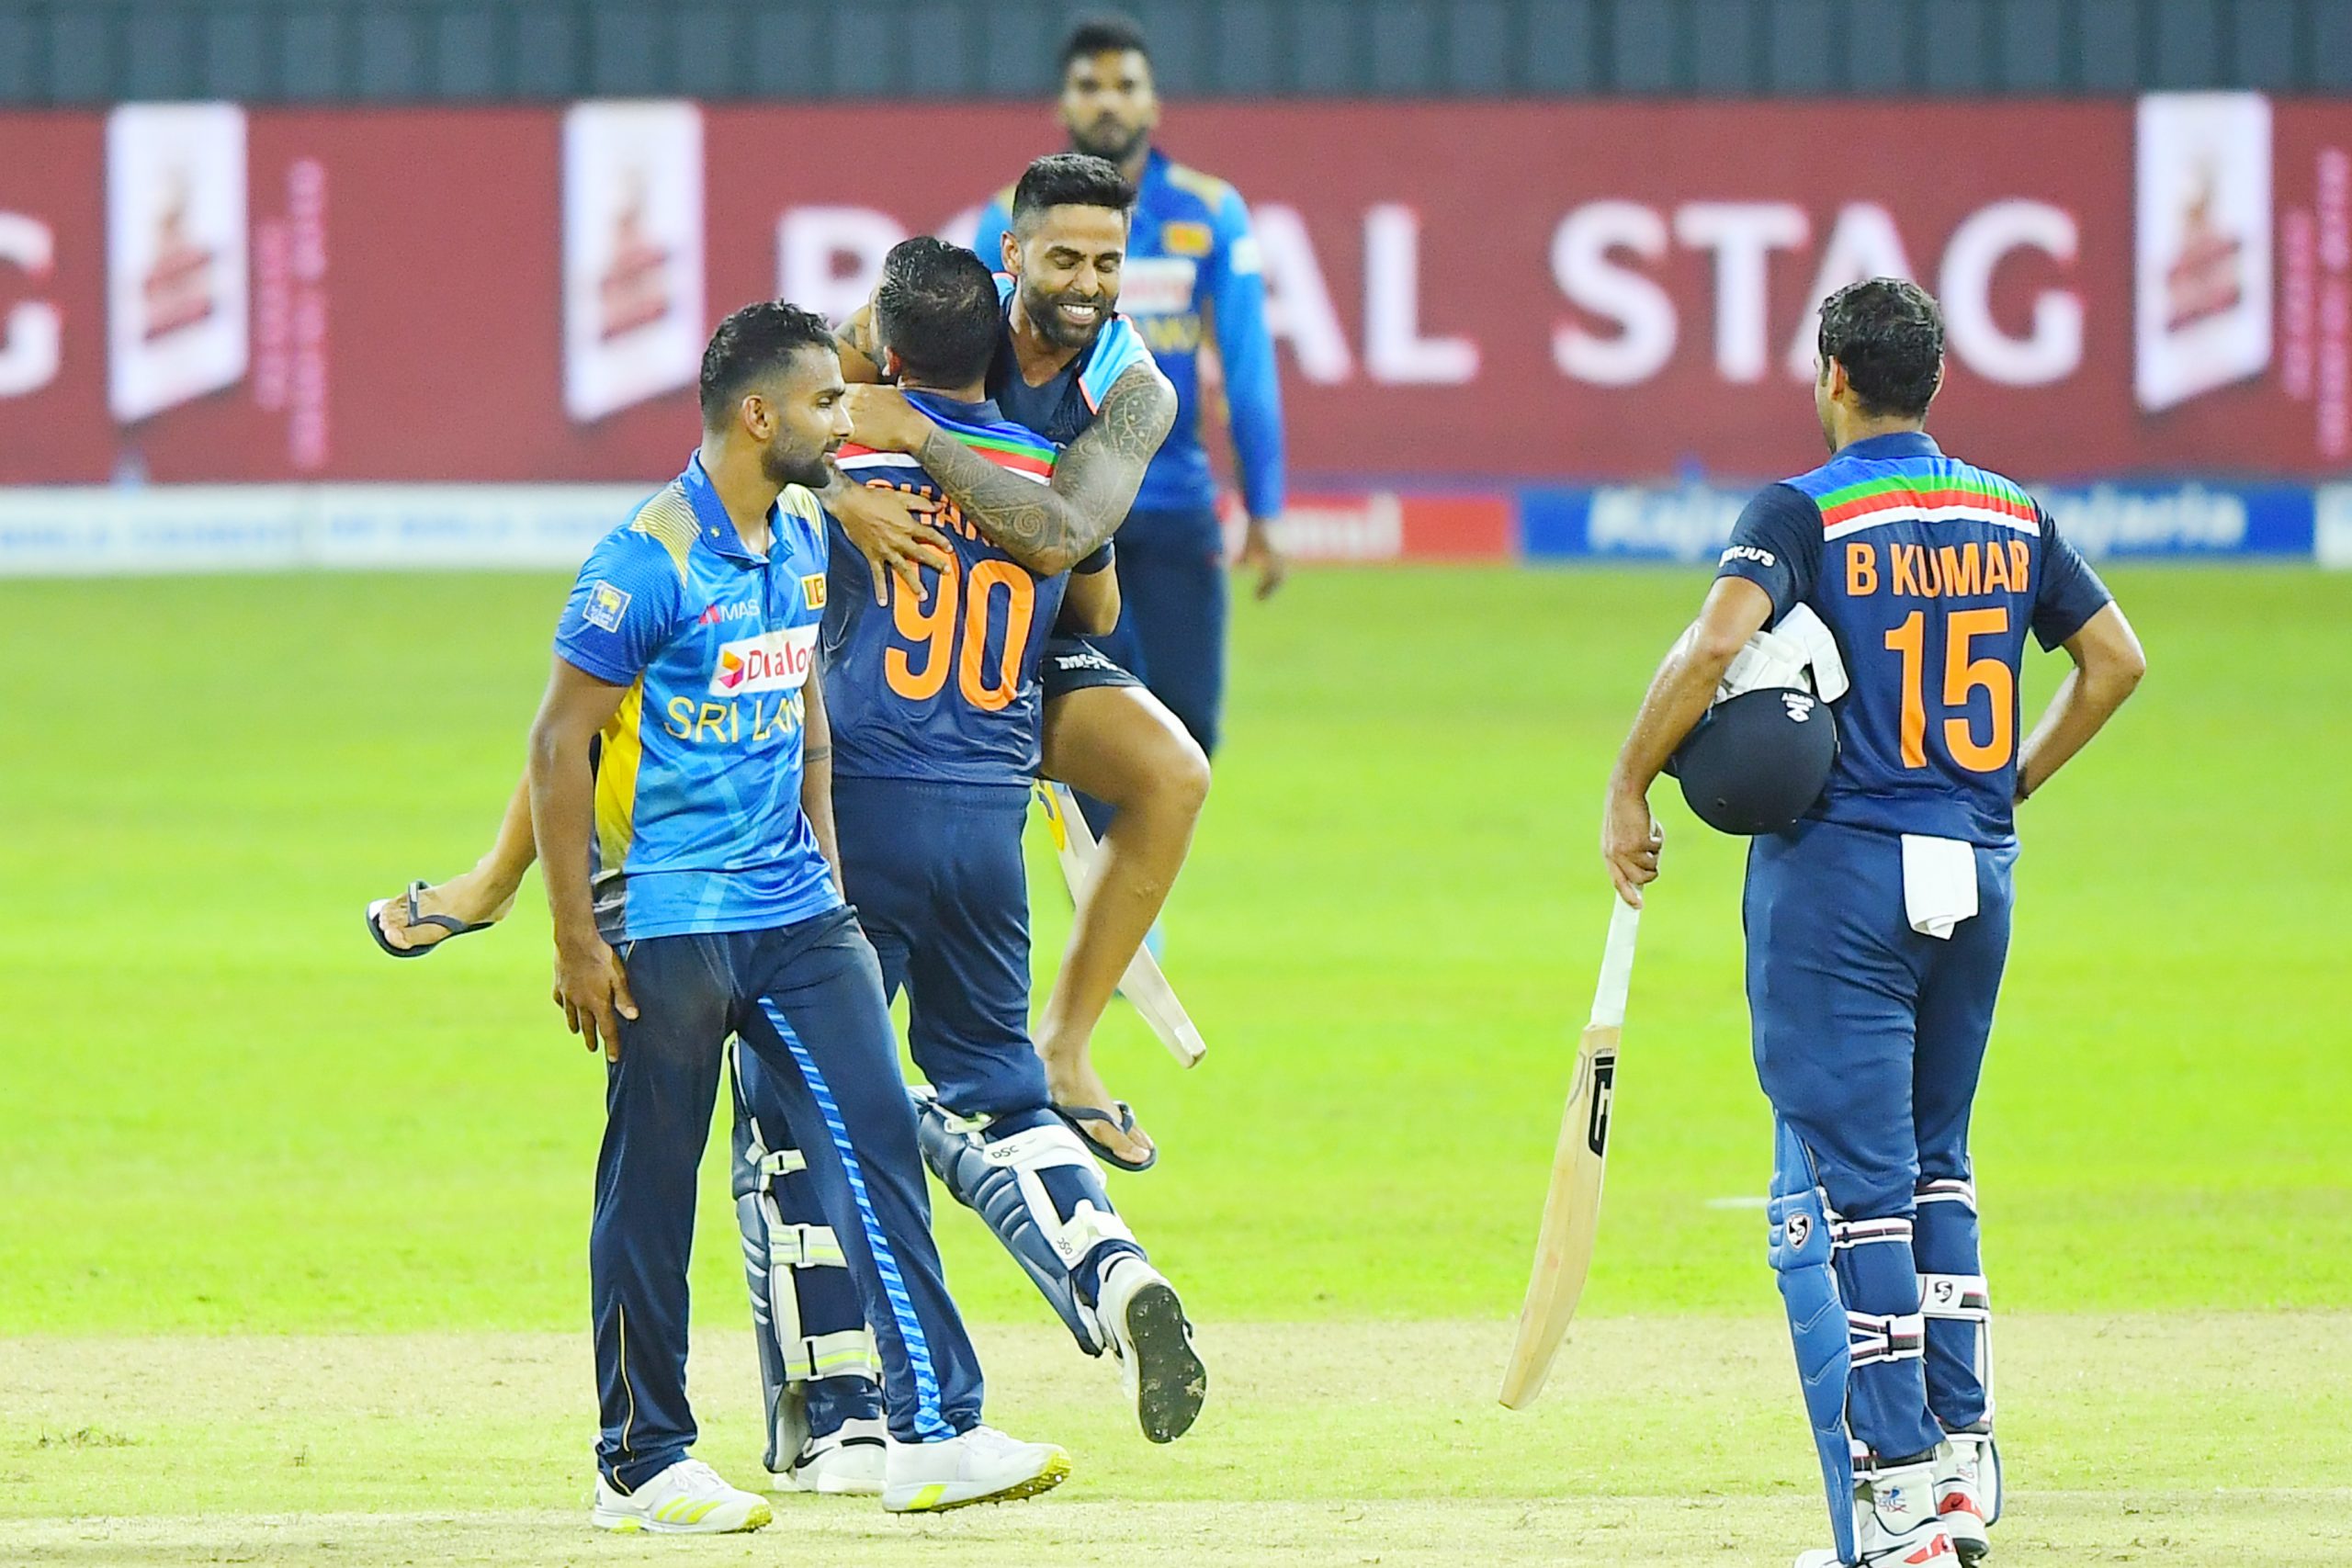 SL vs IND 2021, 3rd ODI Preview: With Series Sealed, Team India Eye Cleansweep